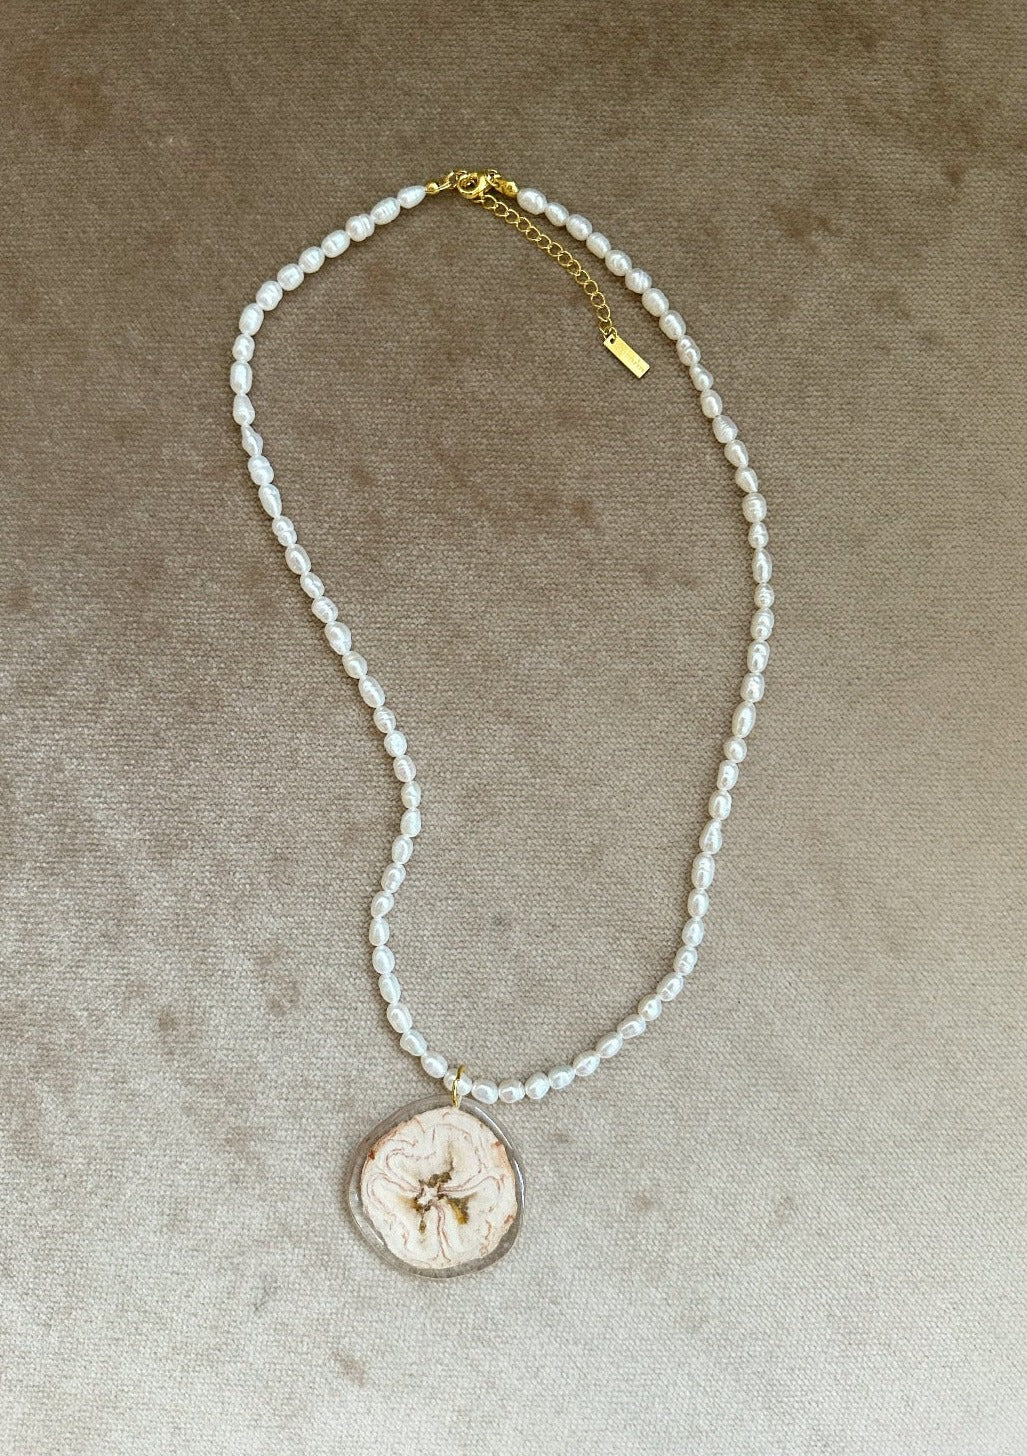  Freshwater rice pearl necklace with a preserved banana cross-section pendant